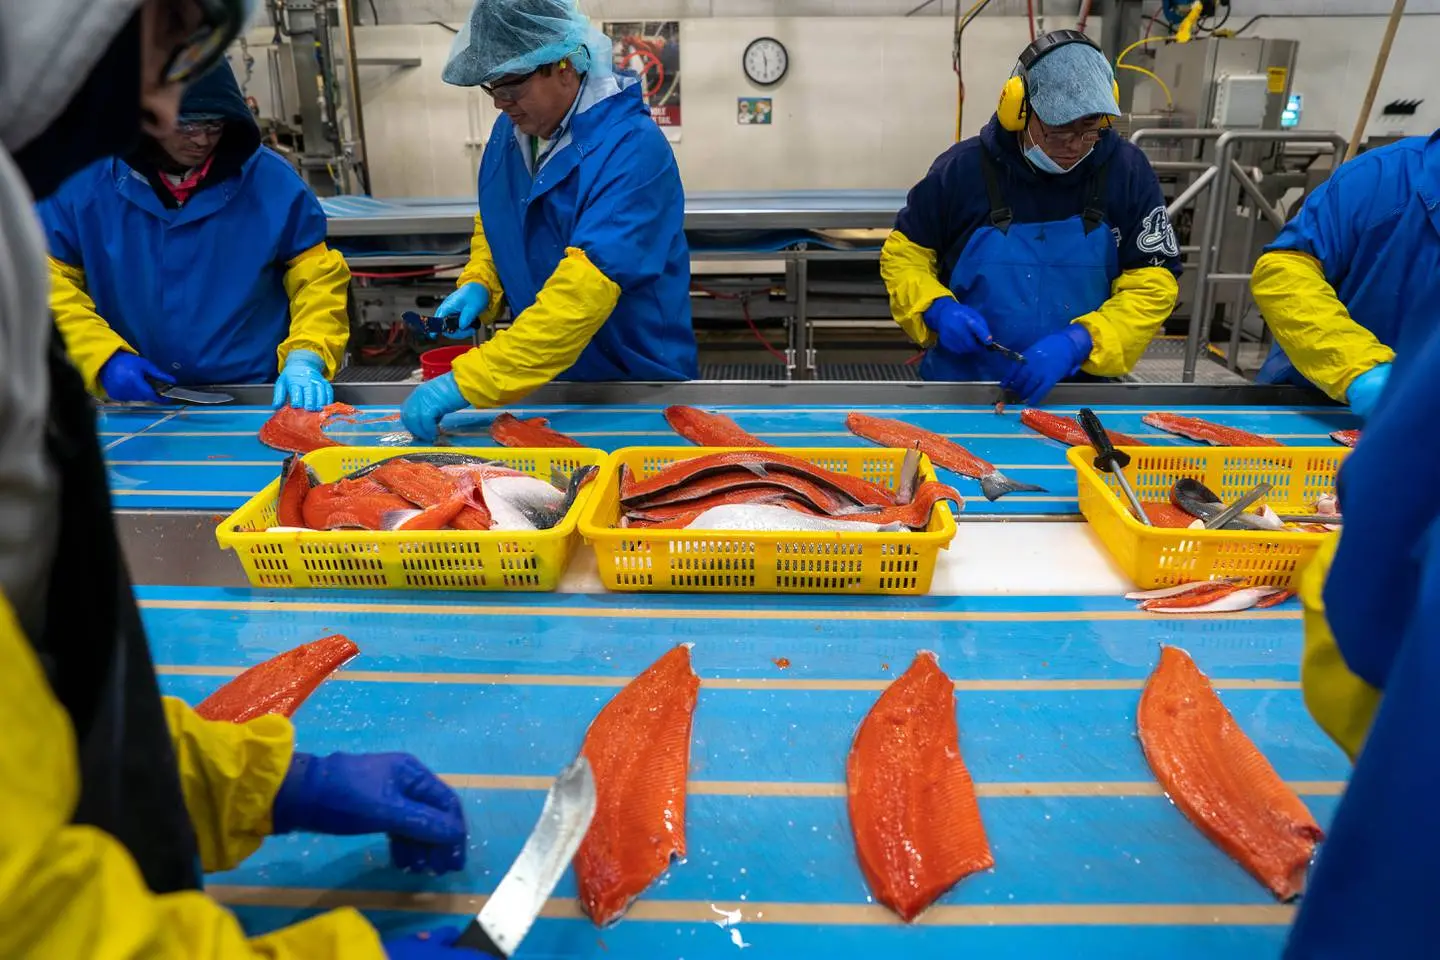 Workers in yellow and blue protective gear slice salmon fillets and stack them in yellow baskets at an indoor processing plant.